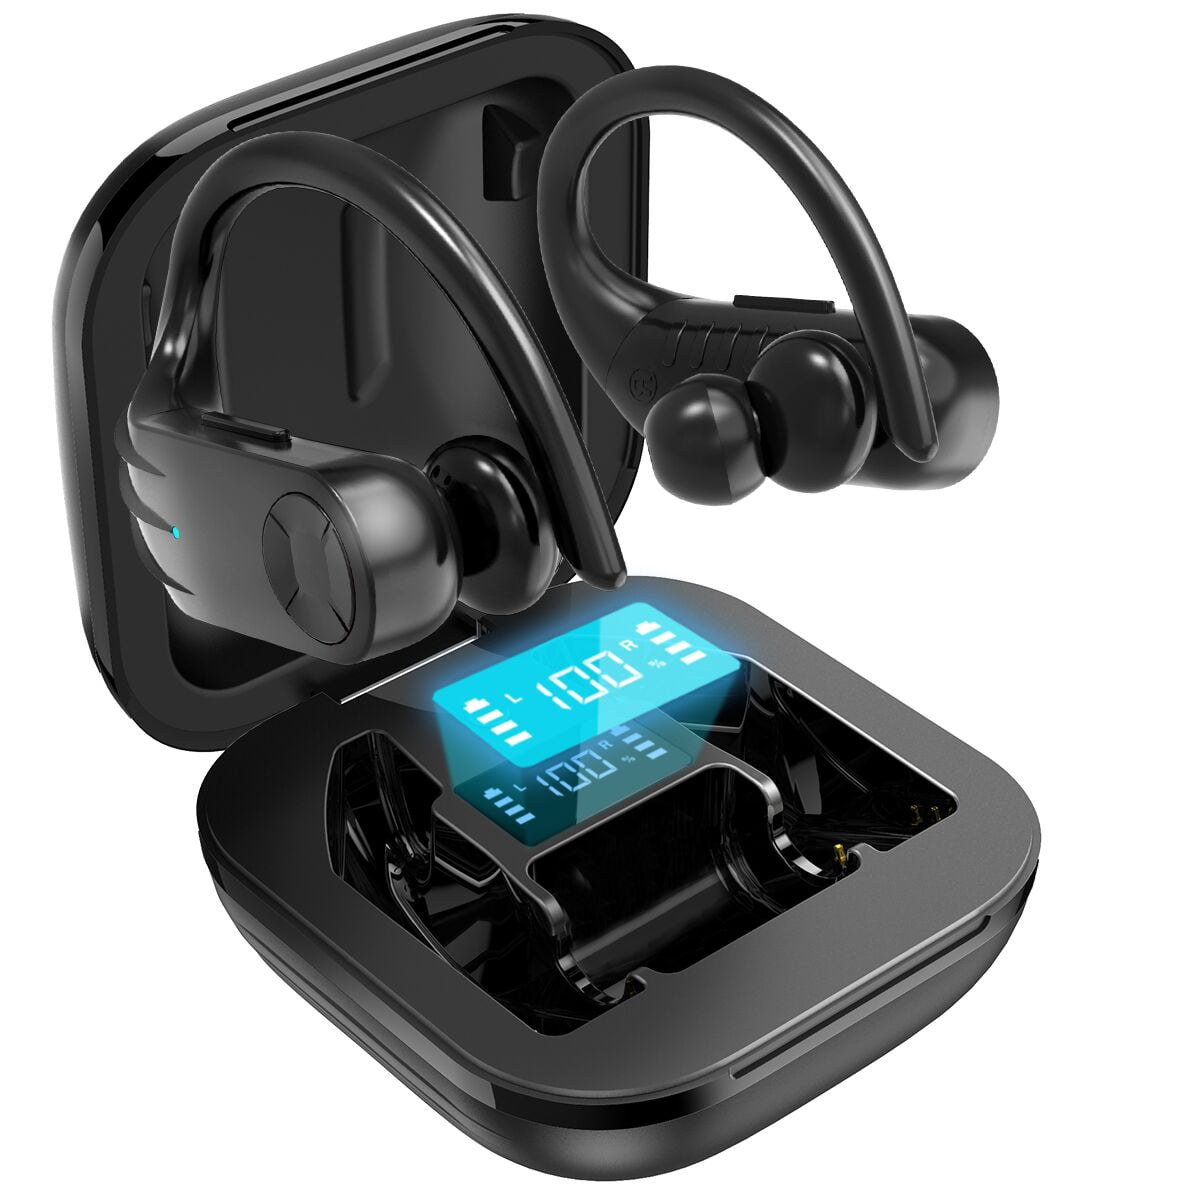 Wireless Earbuds Bluetooth Headphones 5.0 True Wireless Sport Earphones Built-in Mic in Ear Running Headset with Earhooks Charging Case Compatible with iPhone 13 Pro Max XS XR Samsung Android